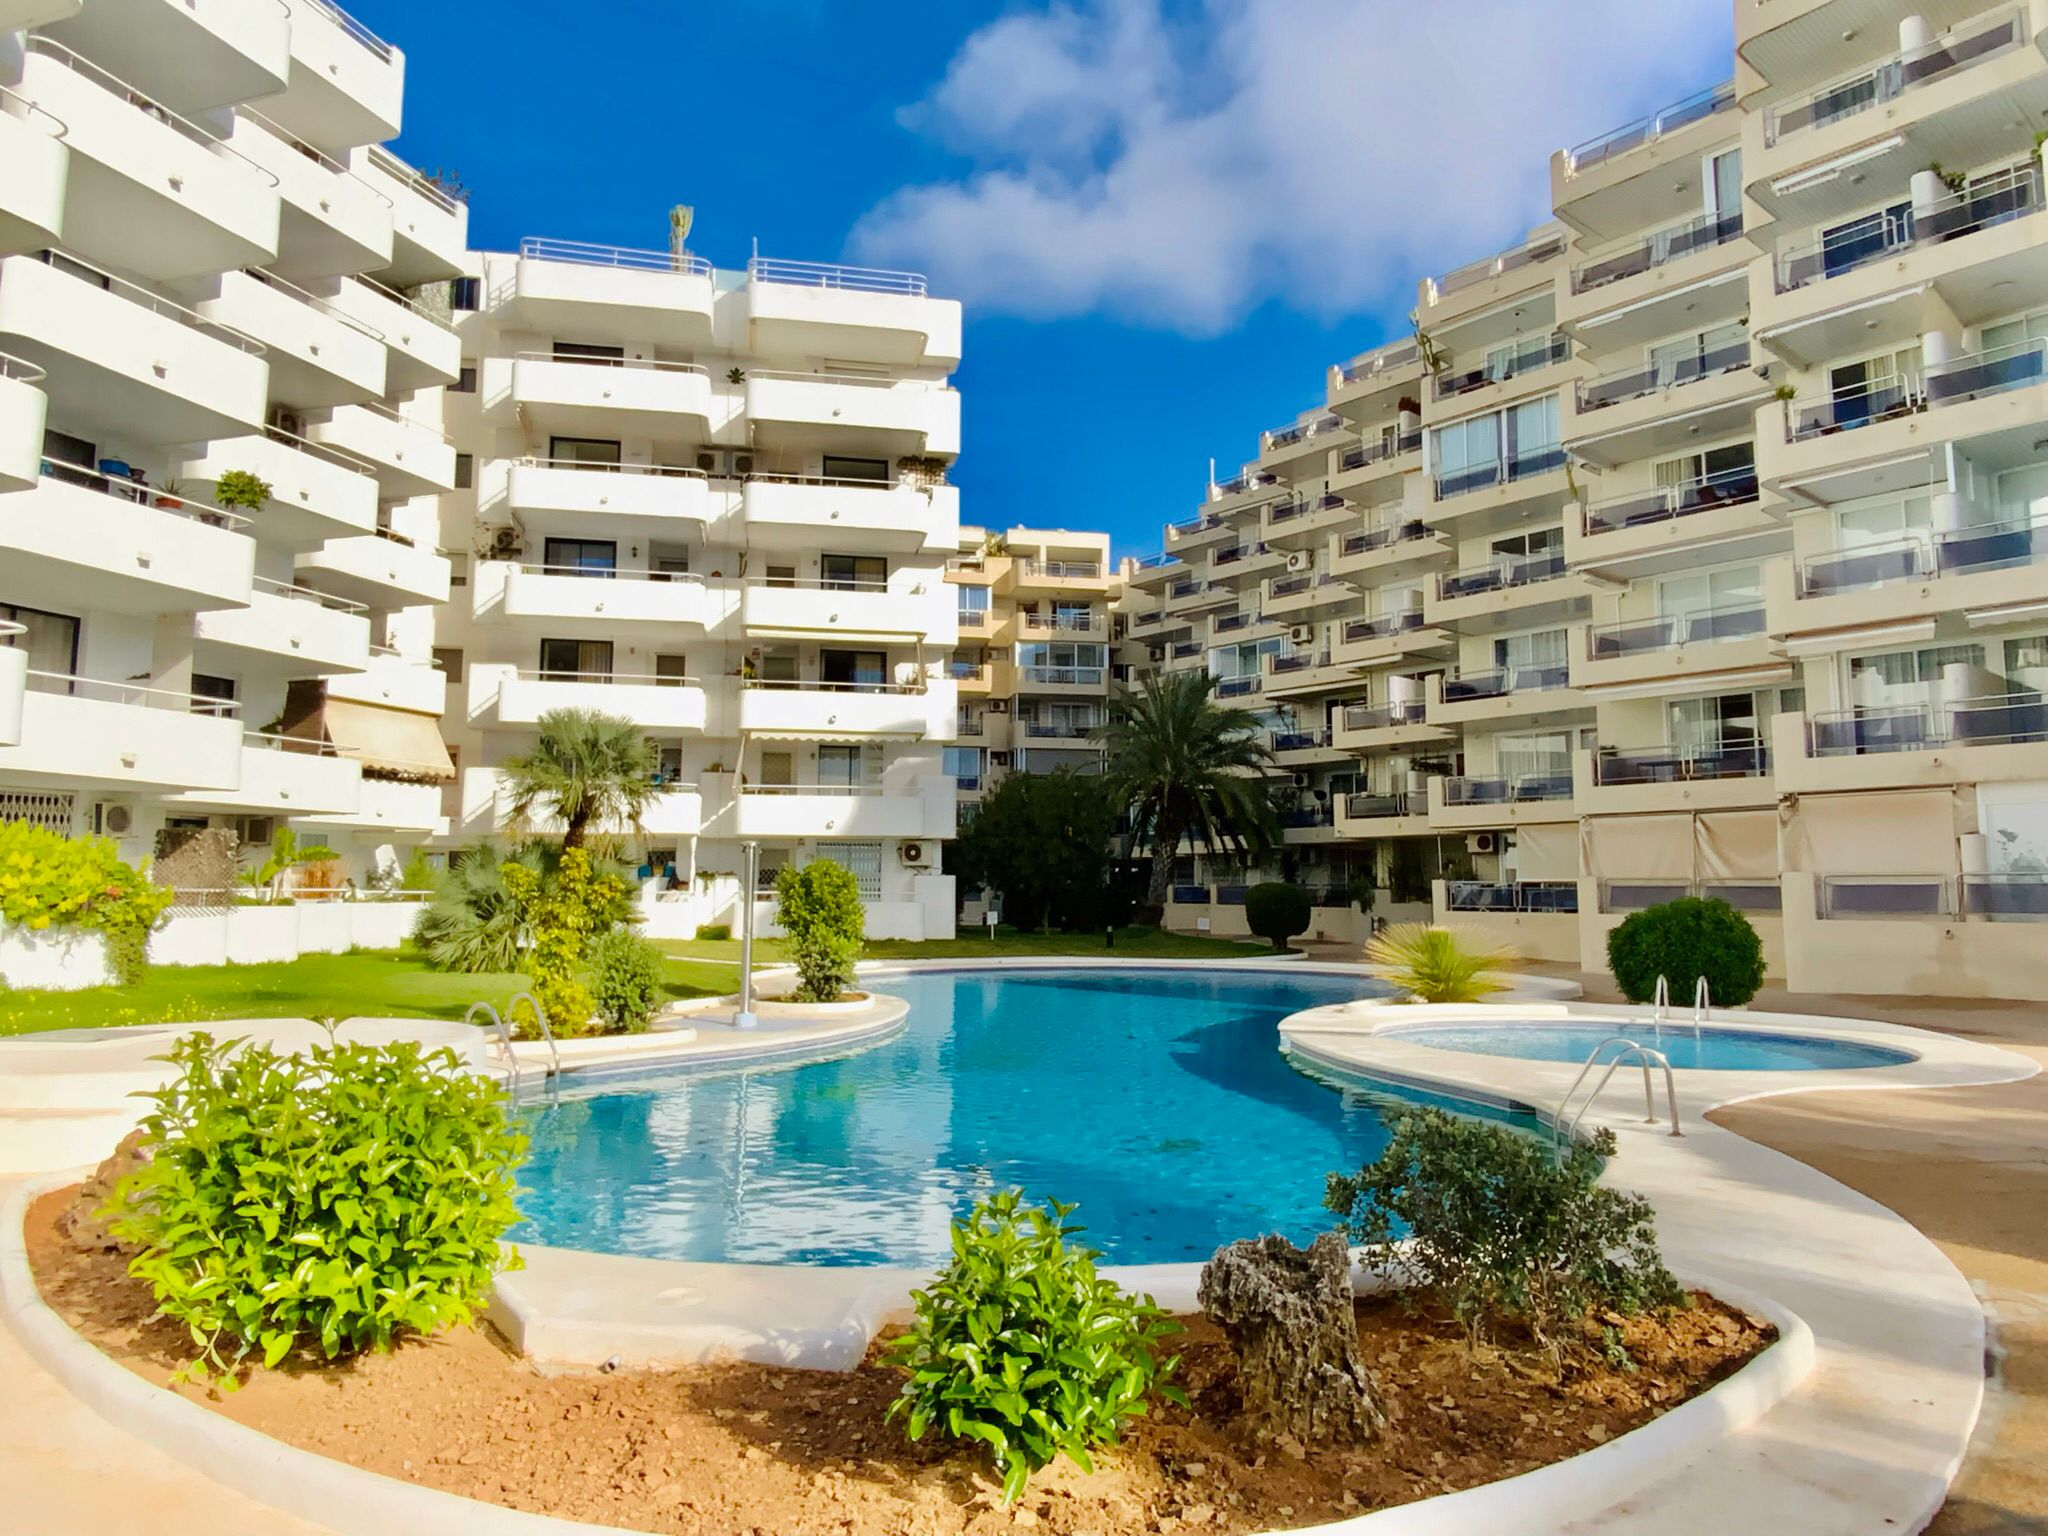 Two-bedroom apartment in the marinas area in Ibiza